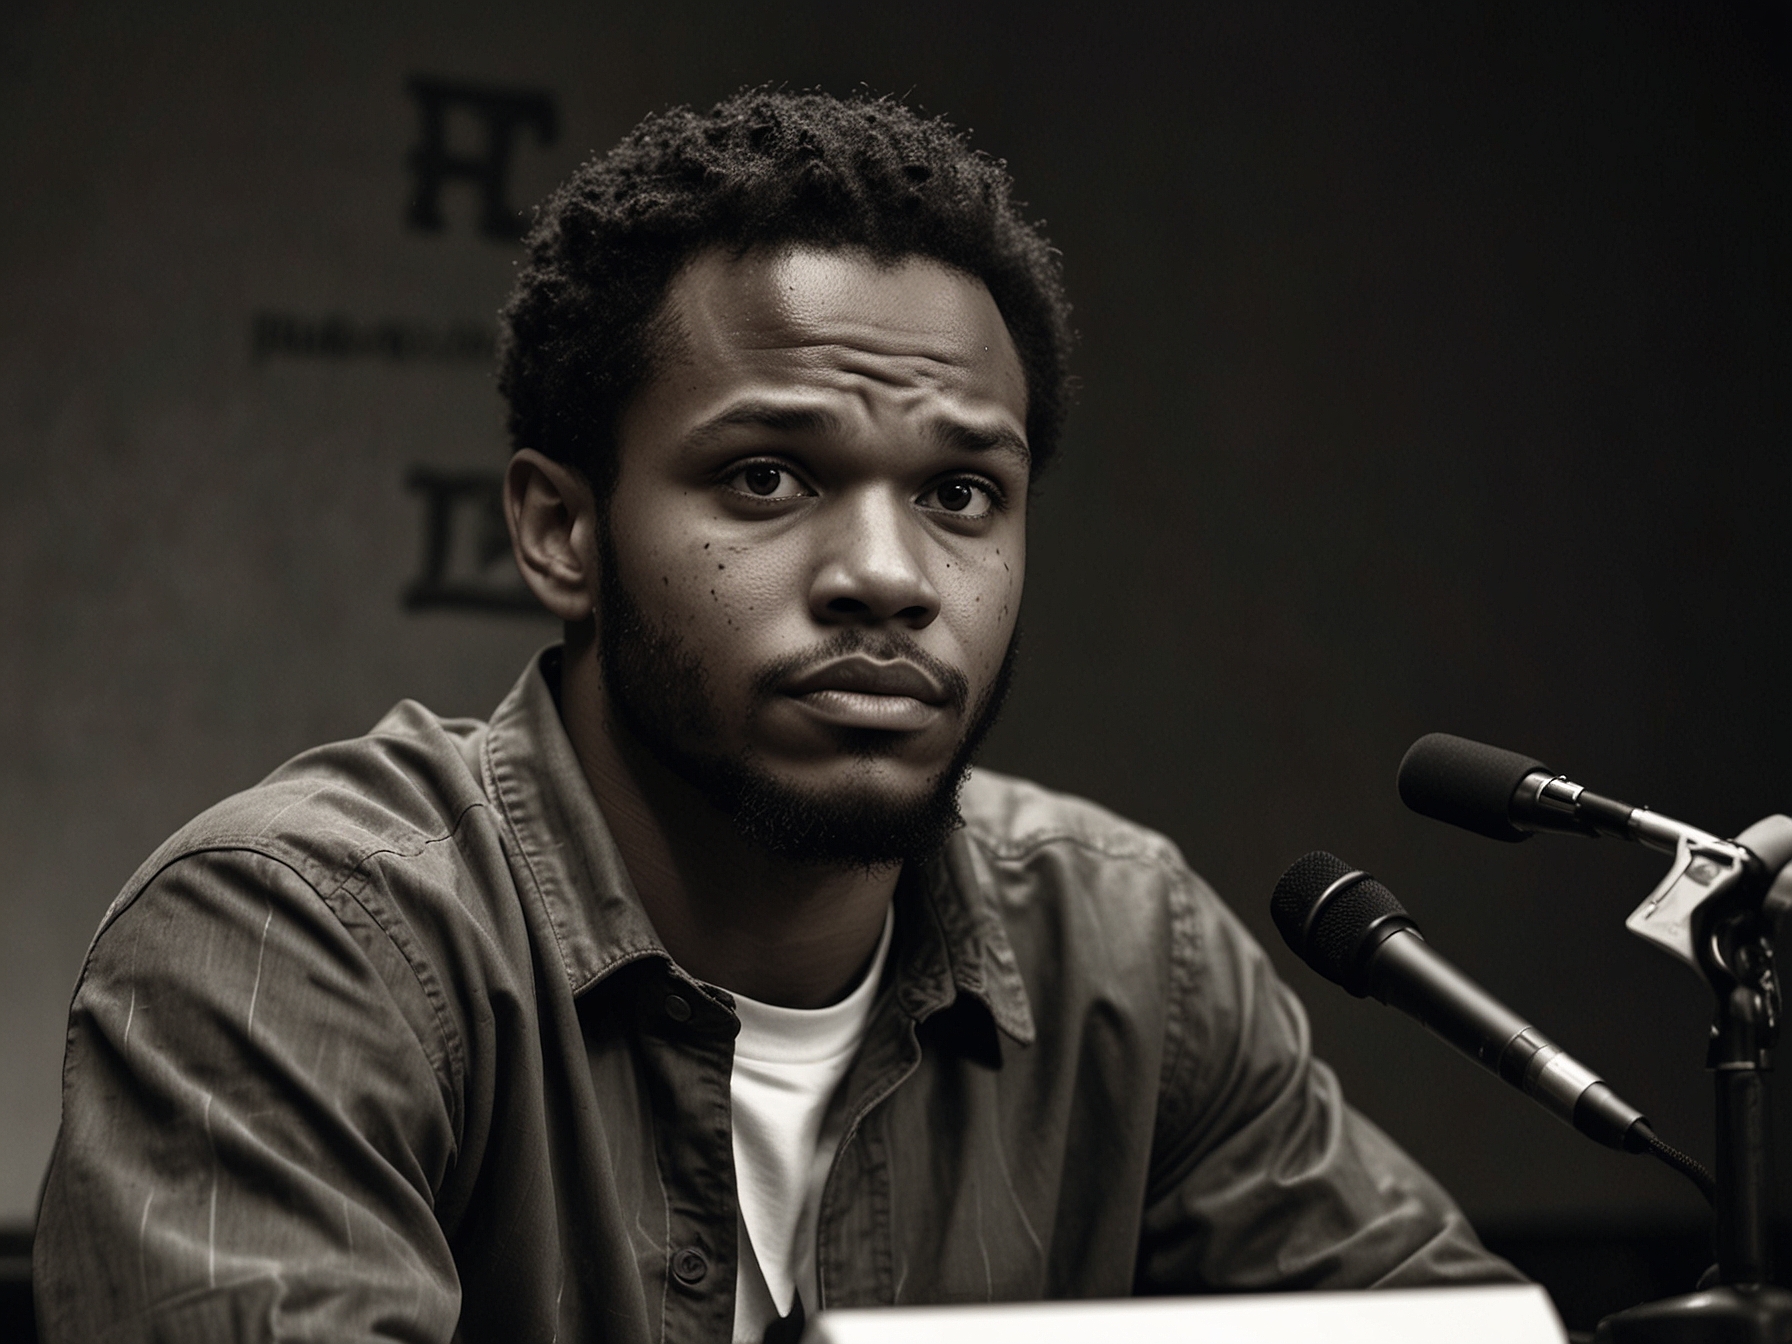 Jamahal Hill sporting a serious expression during a press conference, discussing his injuries.